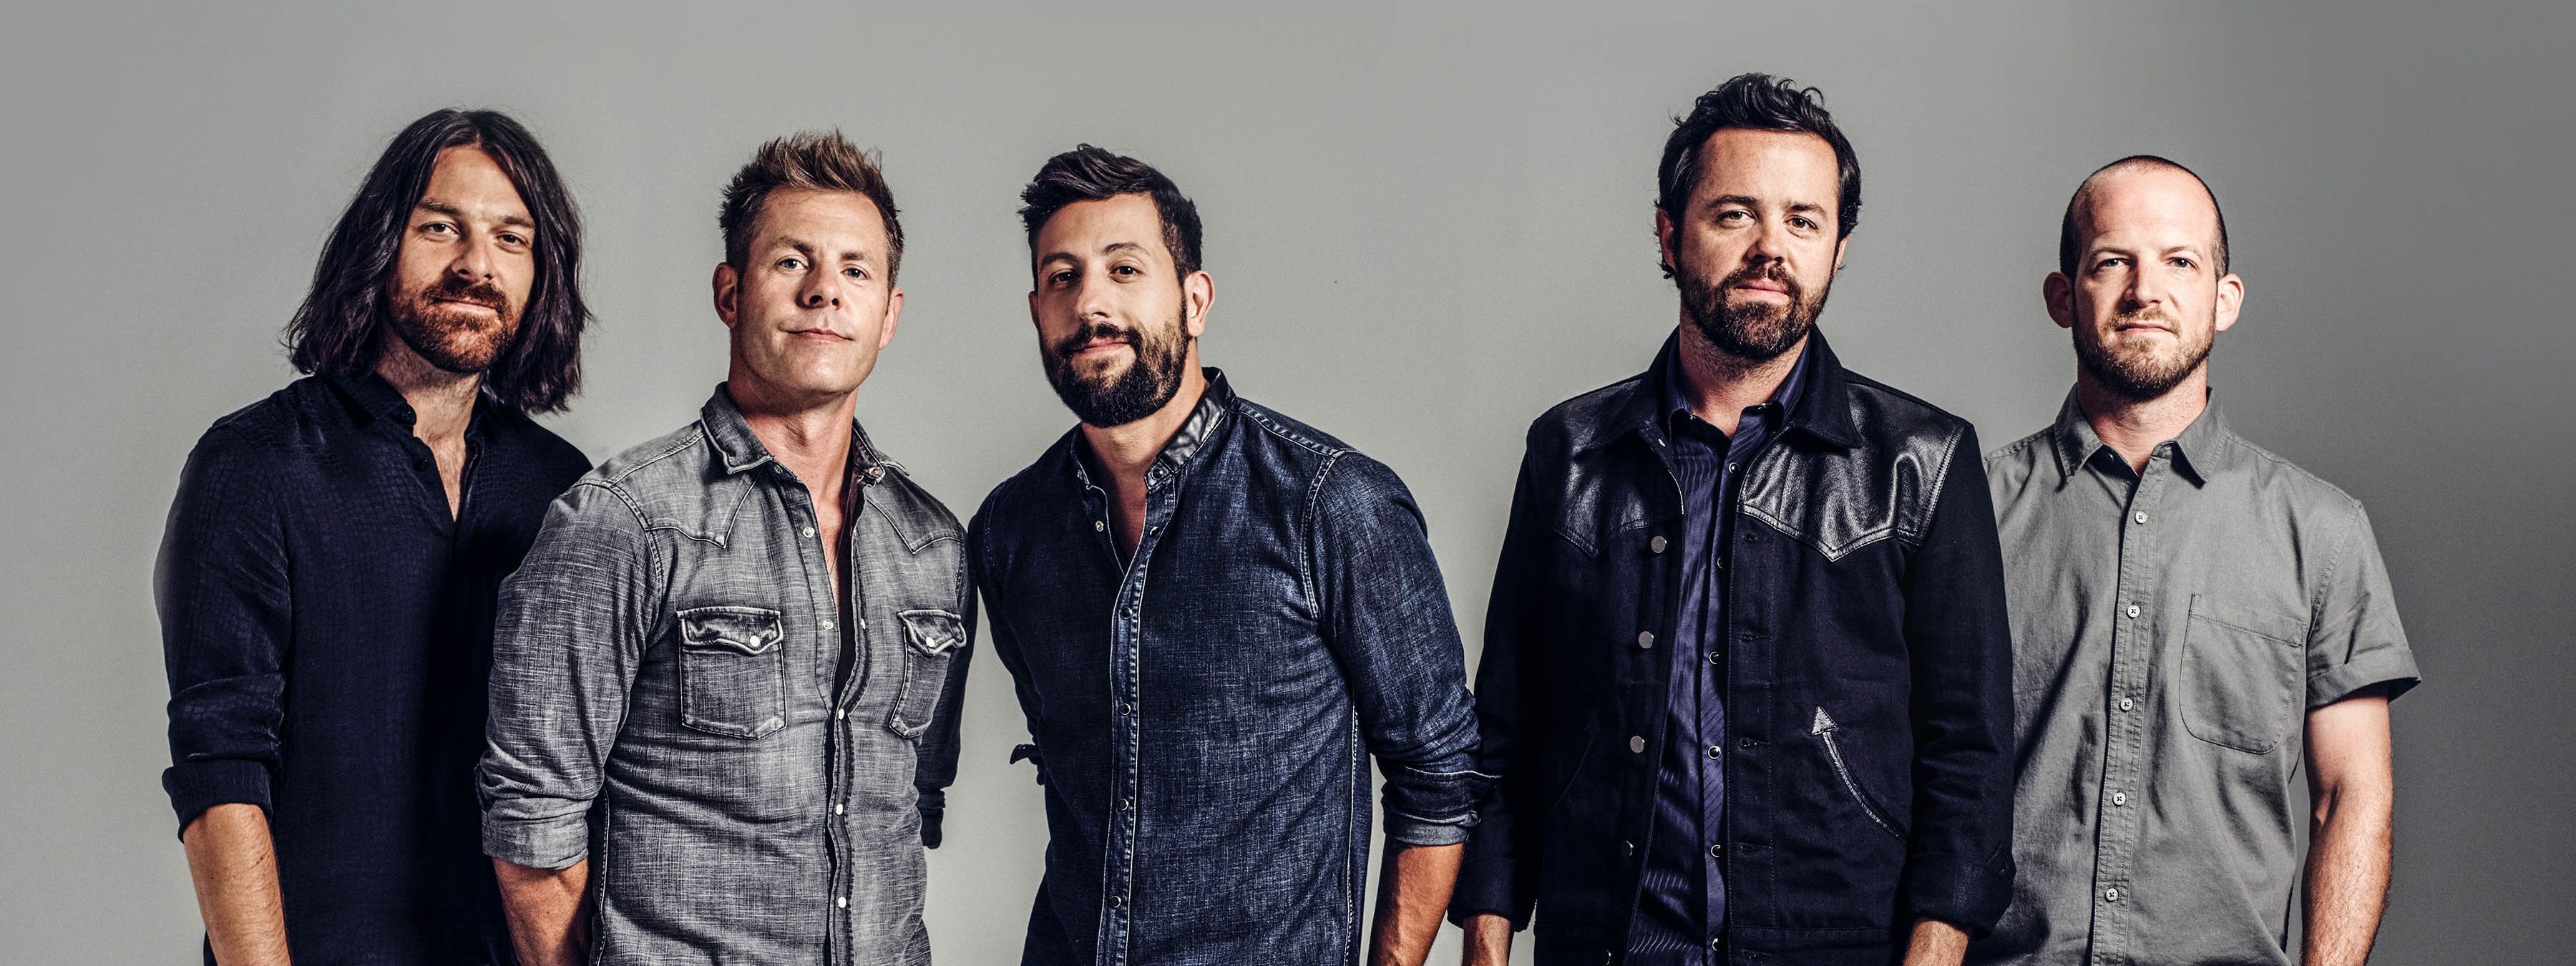 Old Dominion Band, Thinking country, Nashville sounds, 3600x1350 Dual Screen Desktop